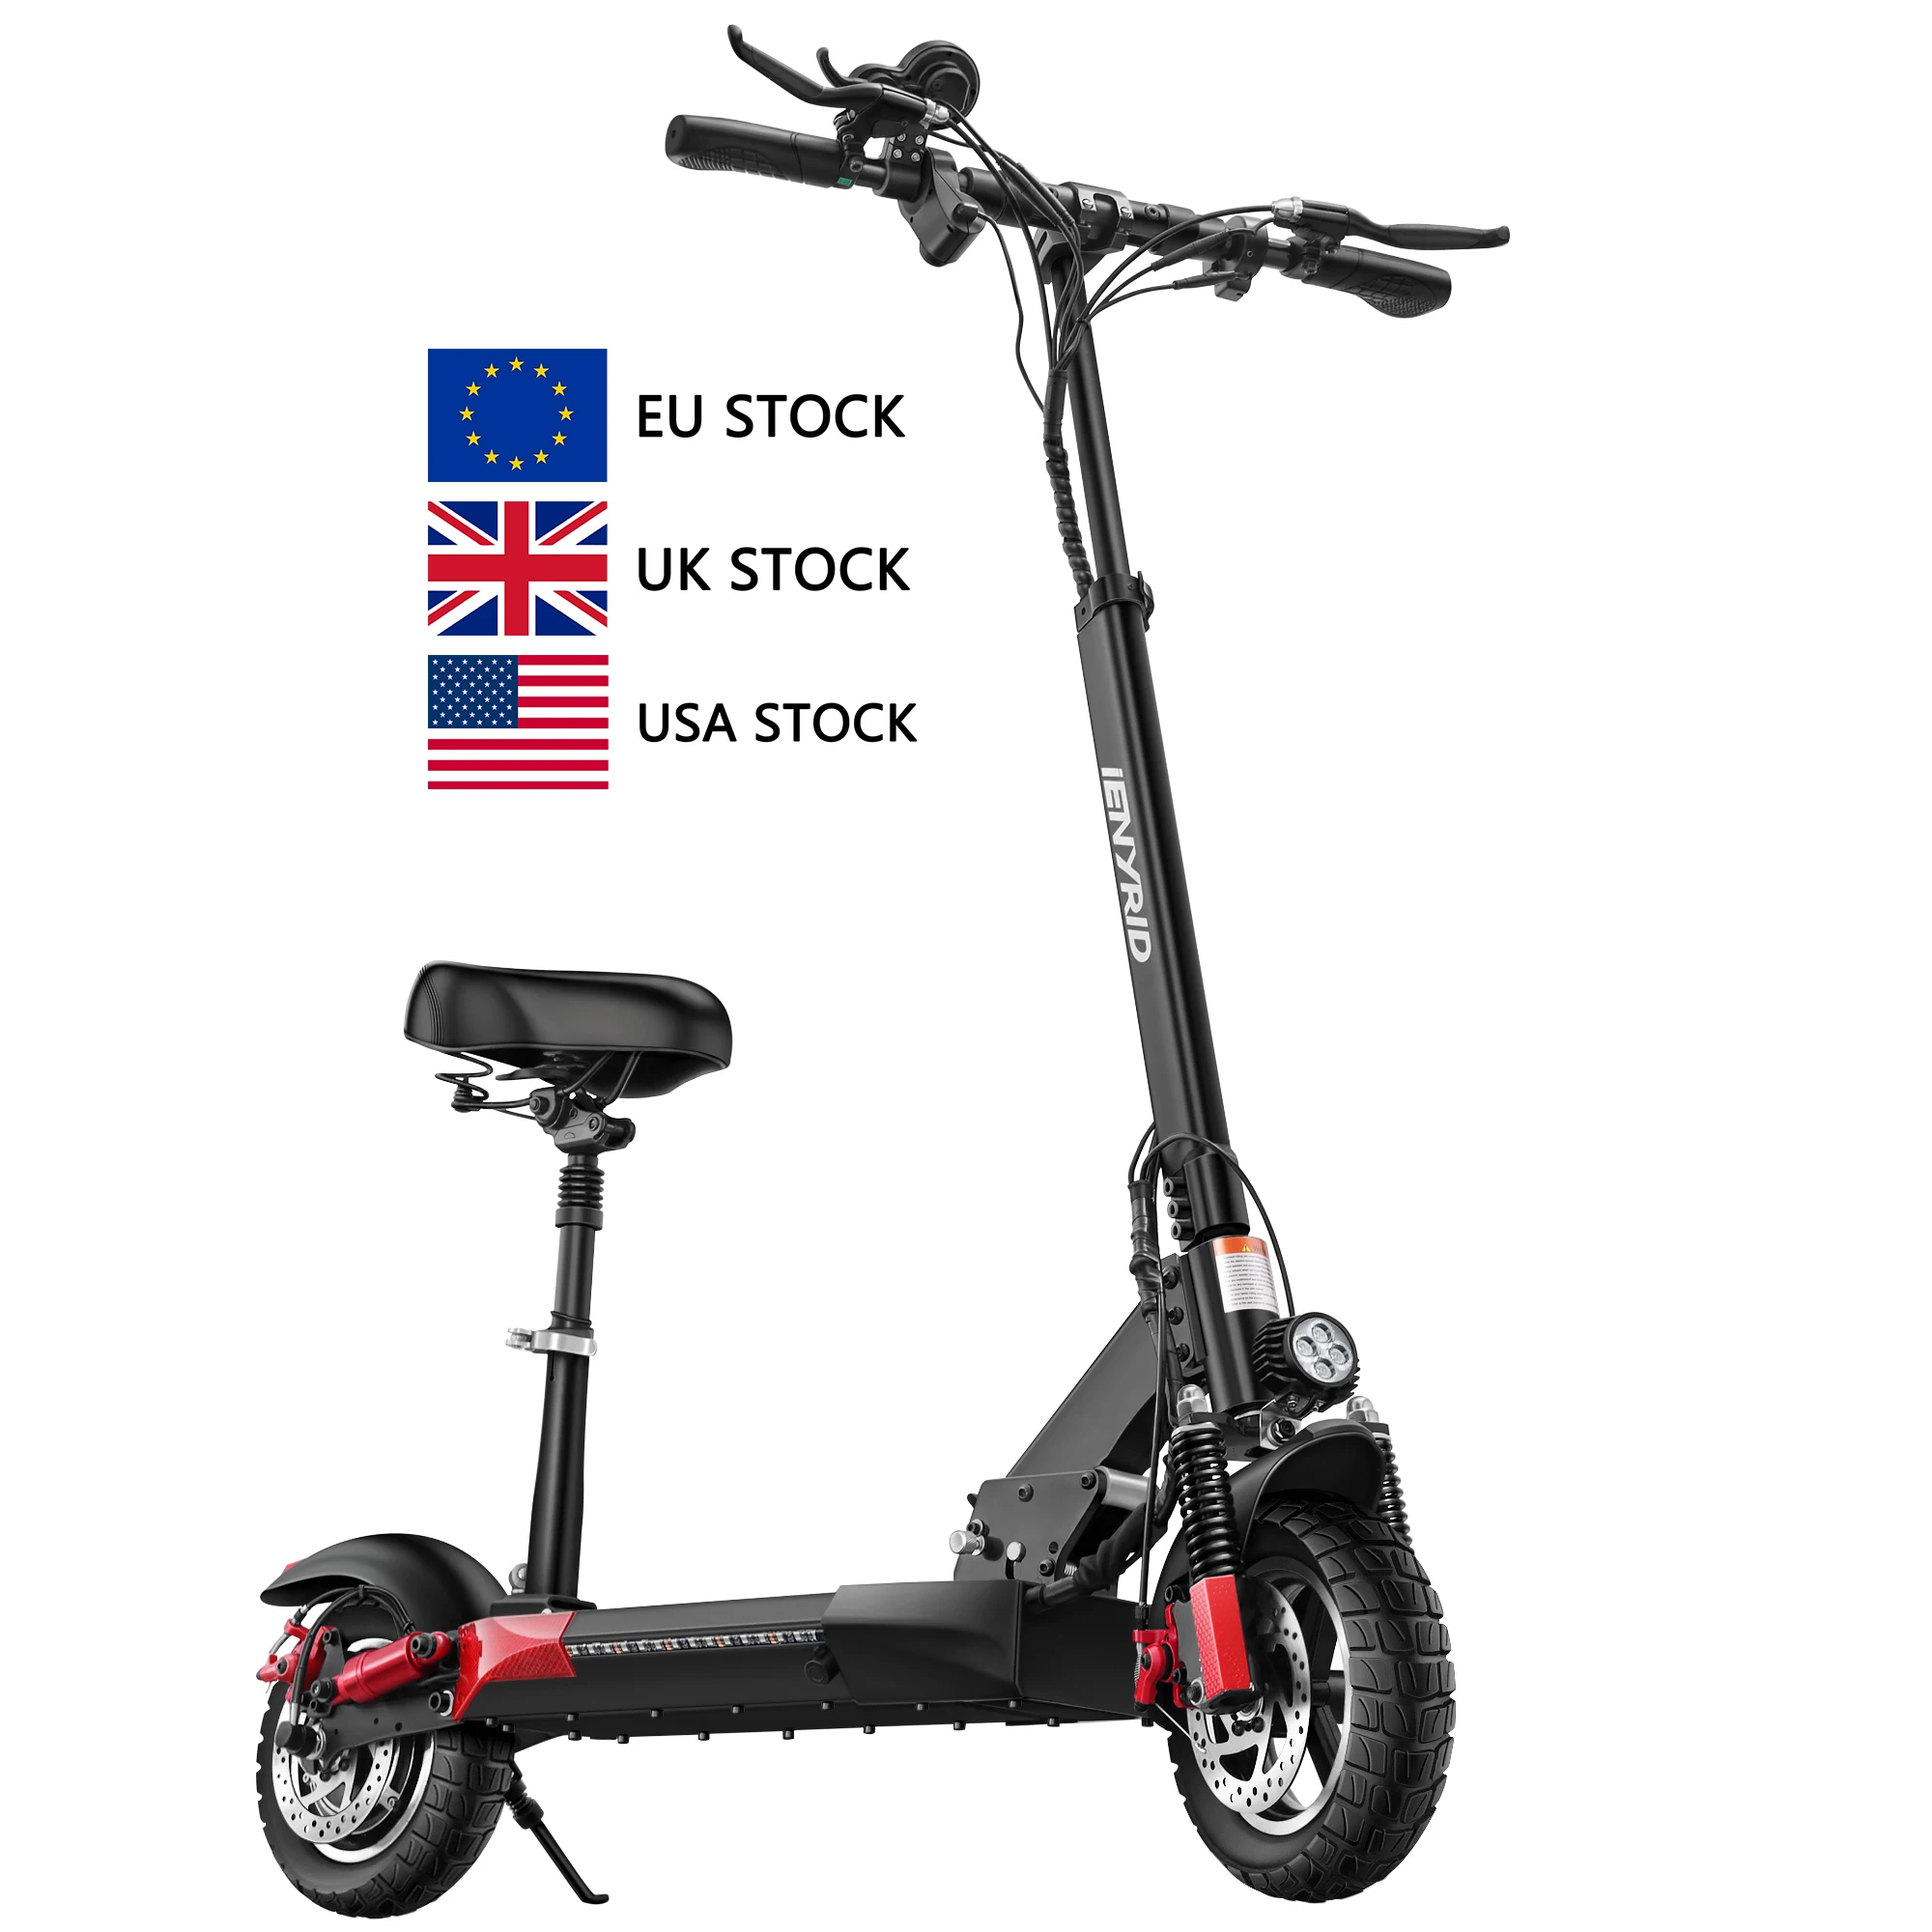 

Eu stock 2021 iENYRID M4 PRO 16ah scooters electric app with max load 150kg 10" Off-road Tires 500W Motor electric scooter